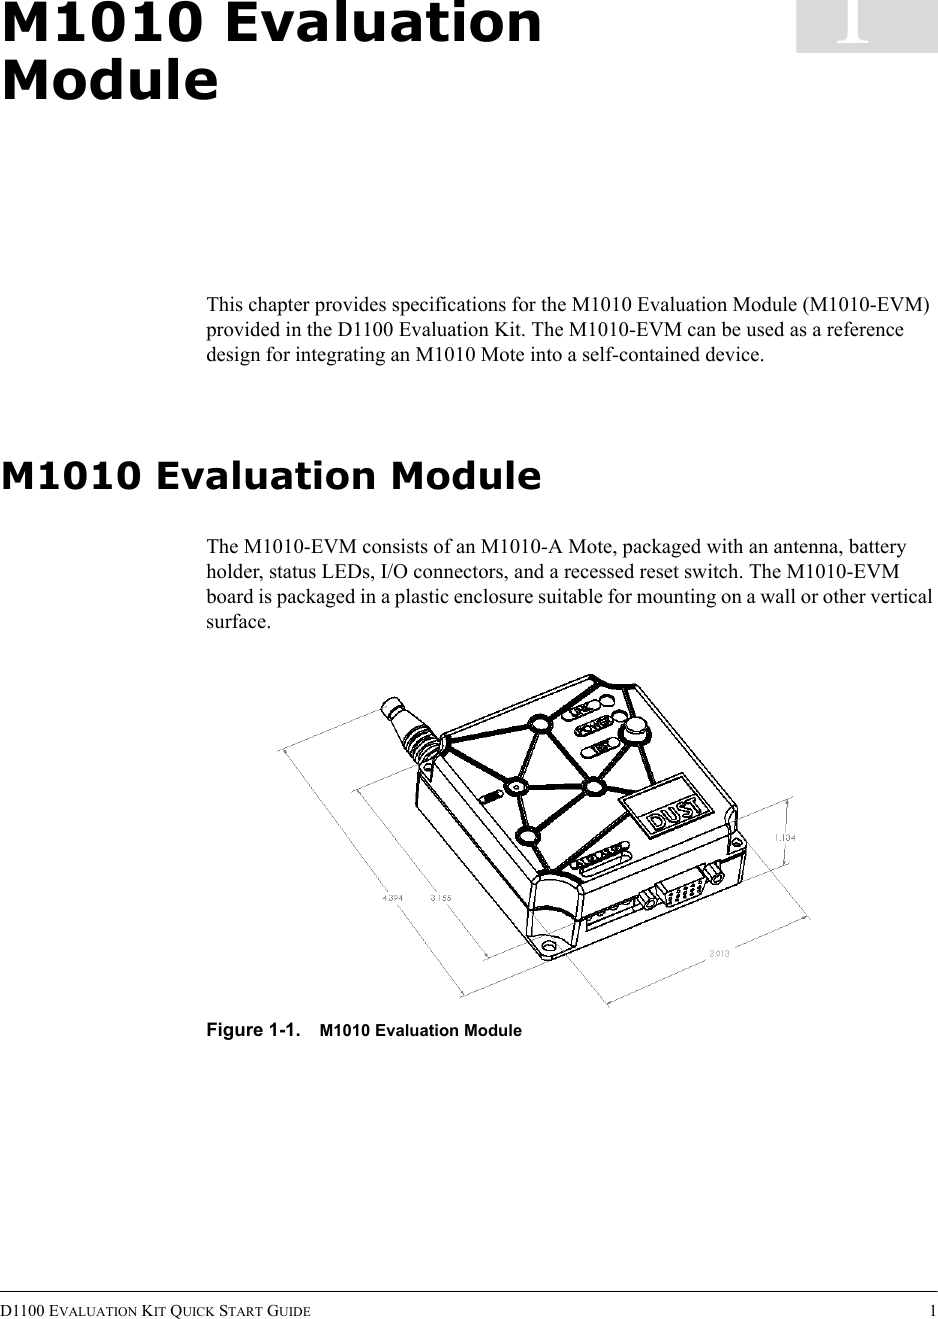 D1100 EVALUATION KIT QUICK START GUIDE 11M1010 Evaluation ModuleThis chapter provides specifications for the M1010 Evaluation Module (M1010-EVM) provided in the D1100 Evaluation Kit. The M1010-EVM can be used as a reference design for integrating an M1010 Mote into a self-contained device.M1010 Evaluation ModuleThe M1010-EVM consists of an M1010-A Mote, packaged with an antenna, battery holder, status LEDs, I/O connectors, and a recessed reset switch. The M1010-EVM board is packaged in a plastic enclosure suitable for mounting on a wall or other vertical surface.Figure 1-1. M1010 Evaluation Module